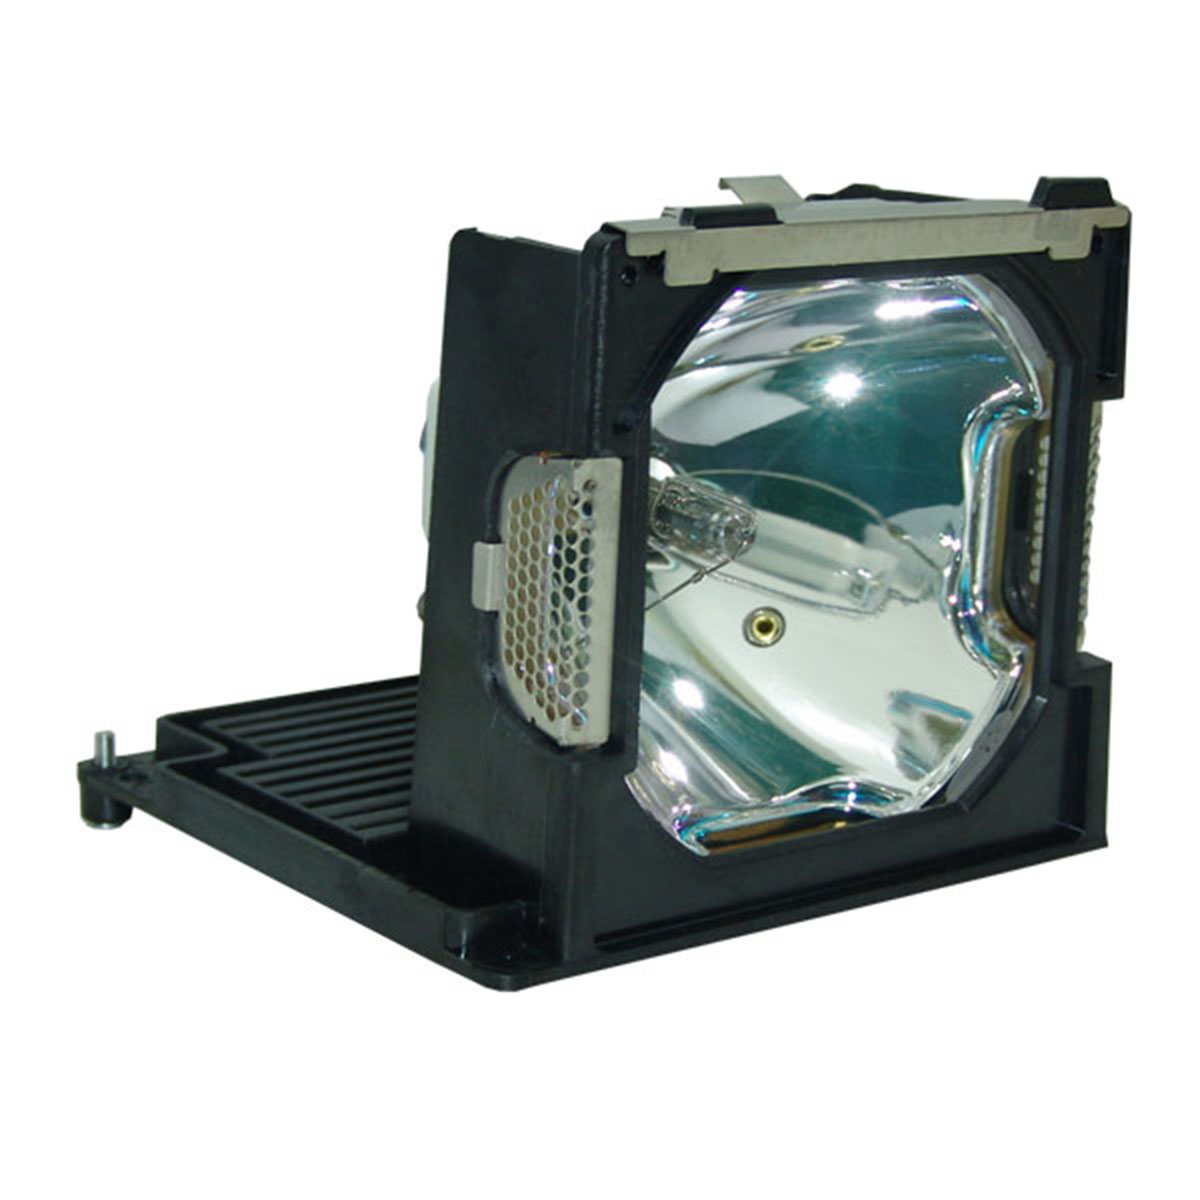 Buyquest PLC-XP56L  OEM Replacement Projector Lamp for Sanyo. Includes New Ushio NSH 300W Bulb and Housing